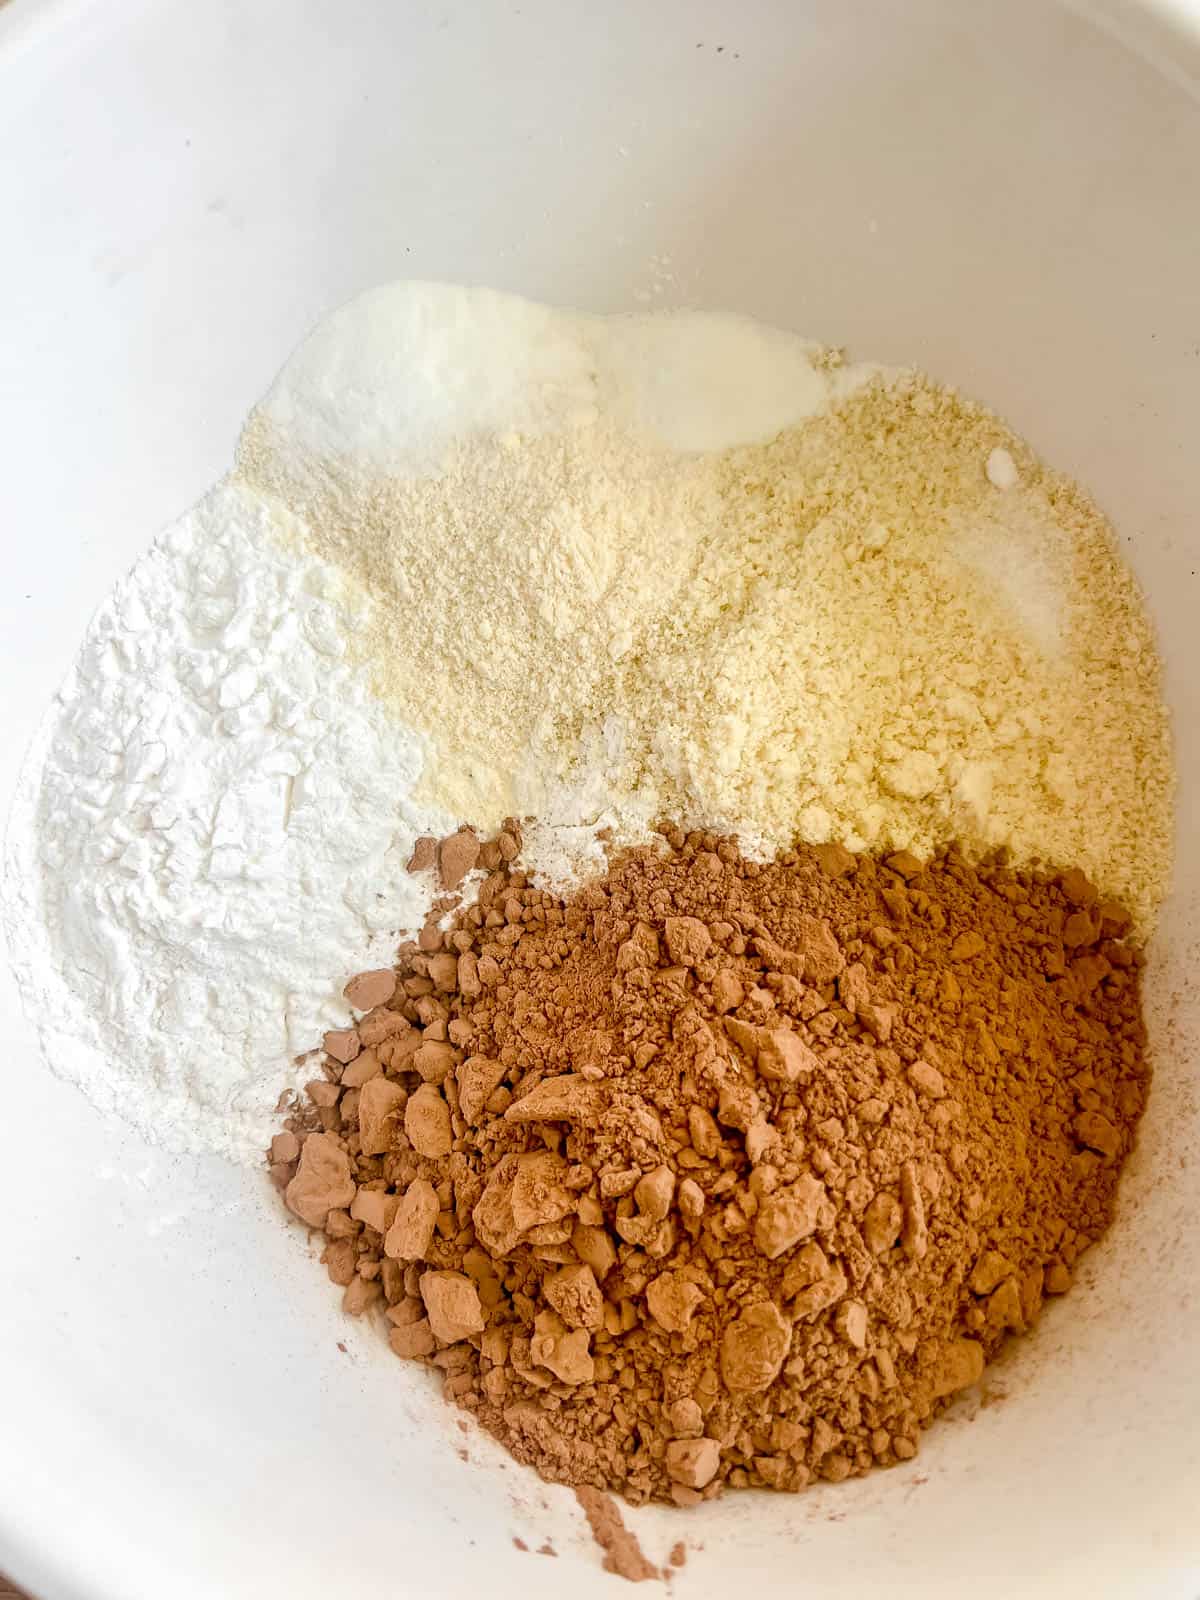 All the dry ingredients in a bowl.